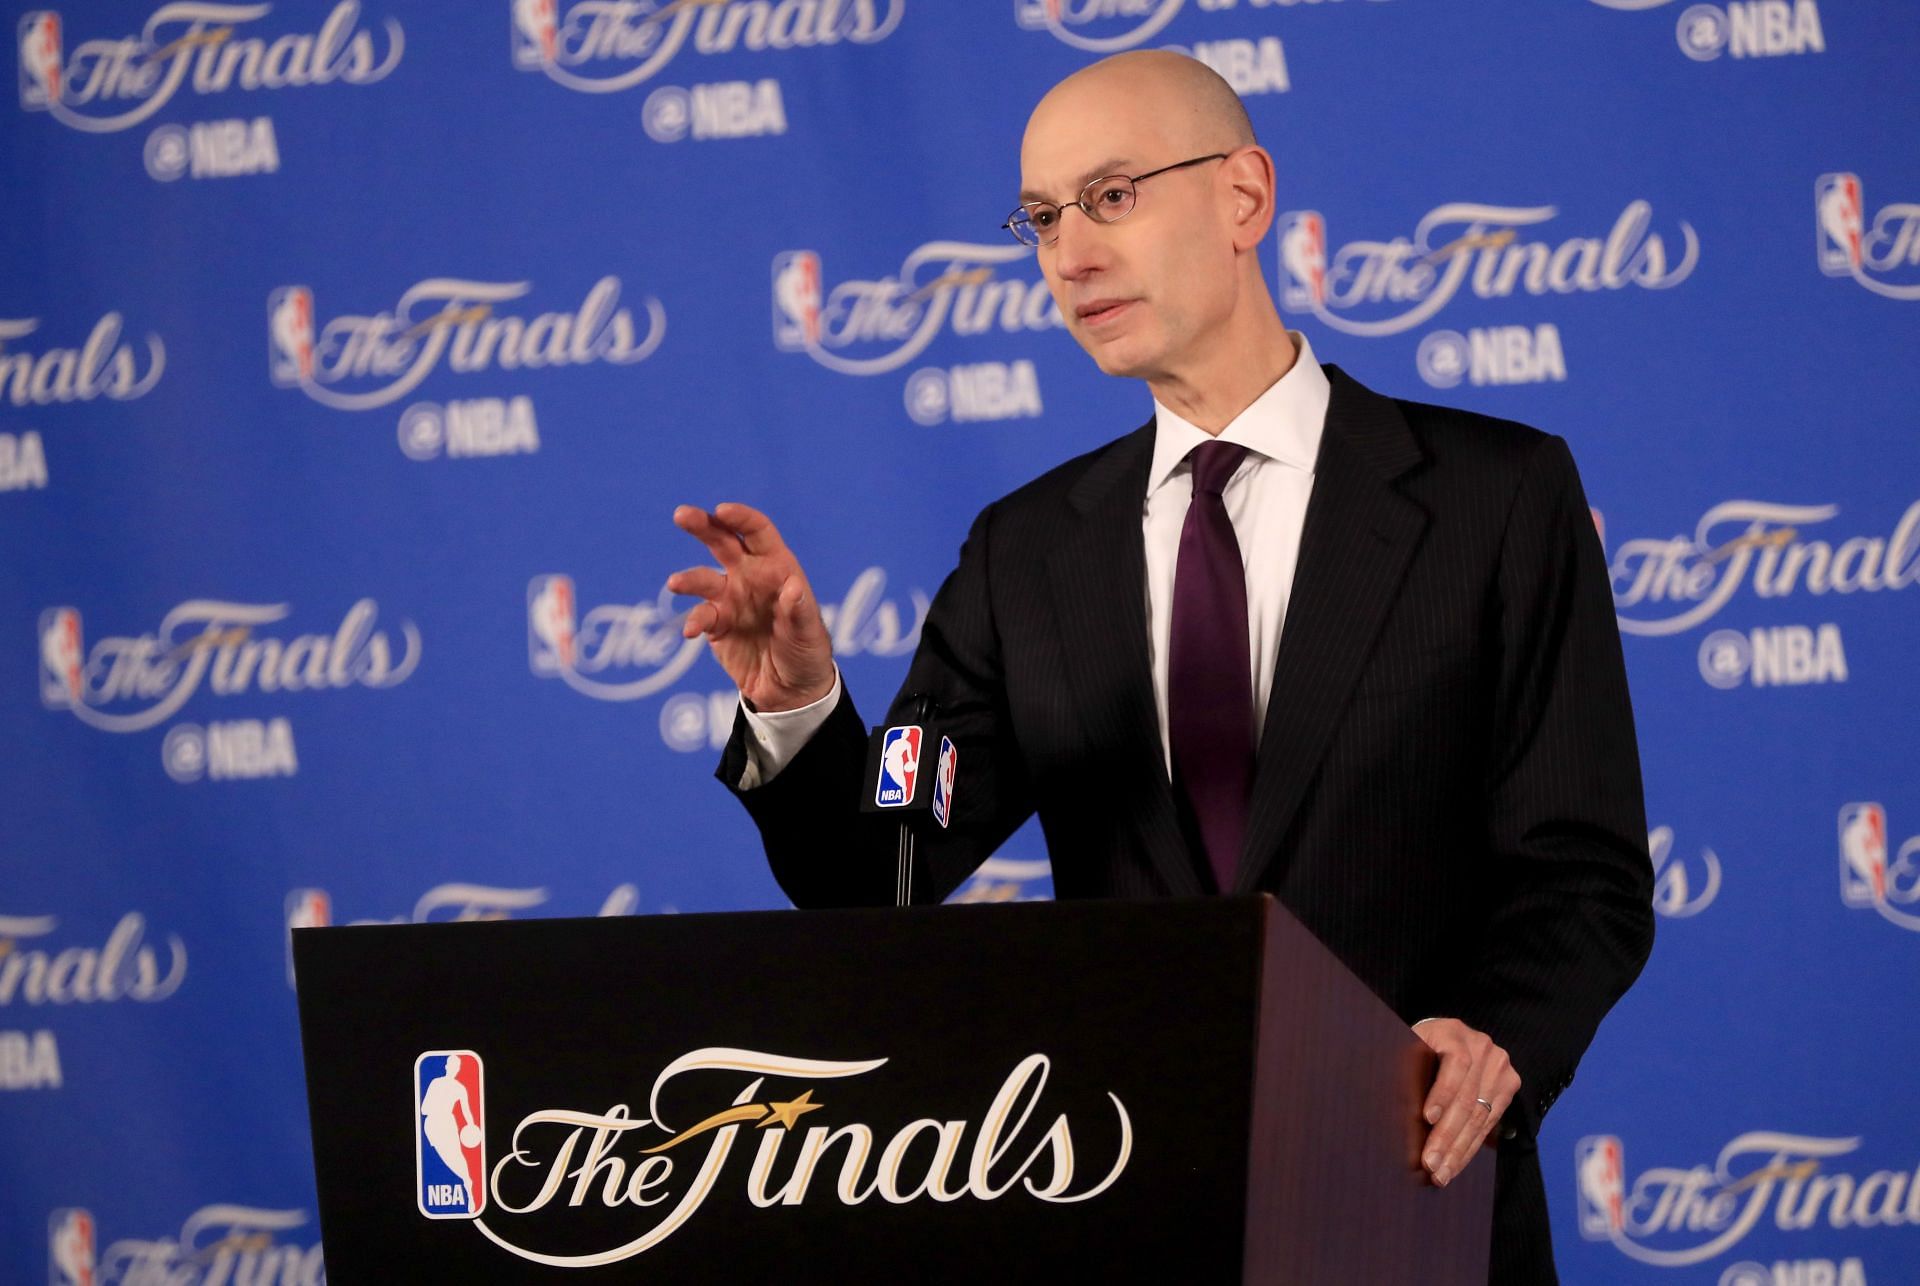 NBA Commissioner Adam Silver during a press conference.